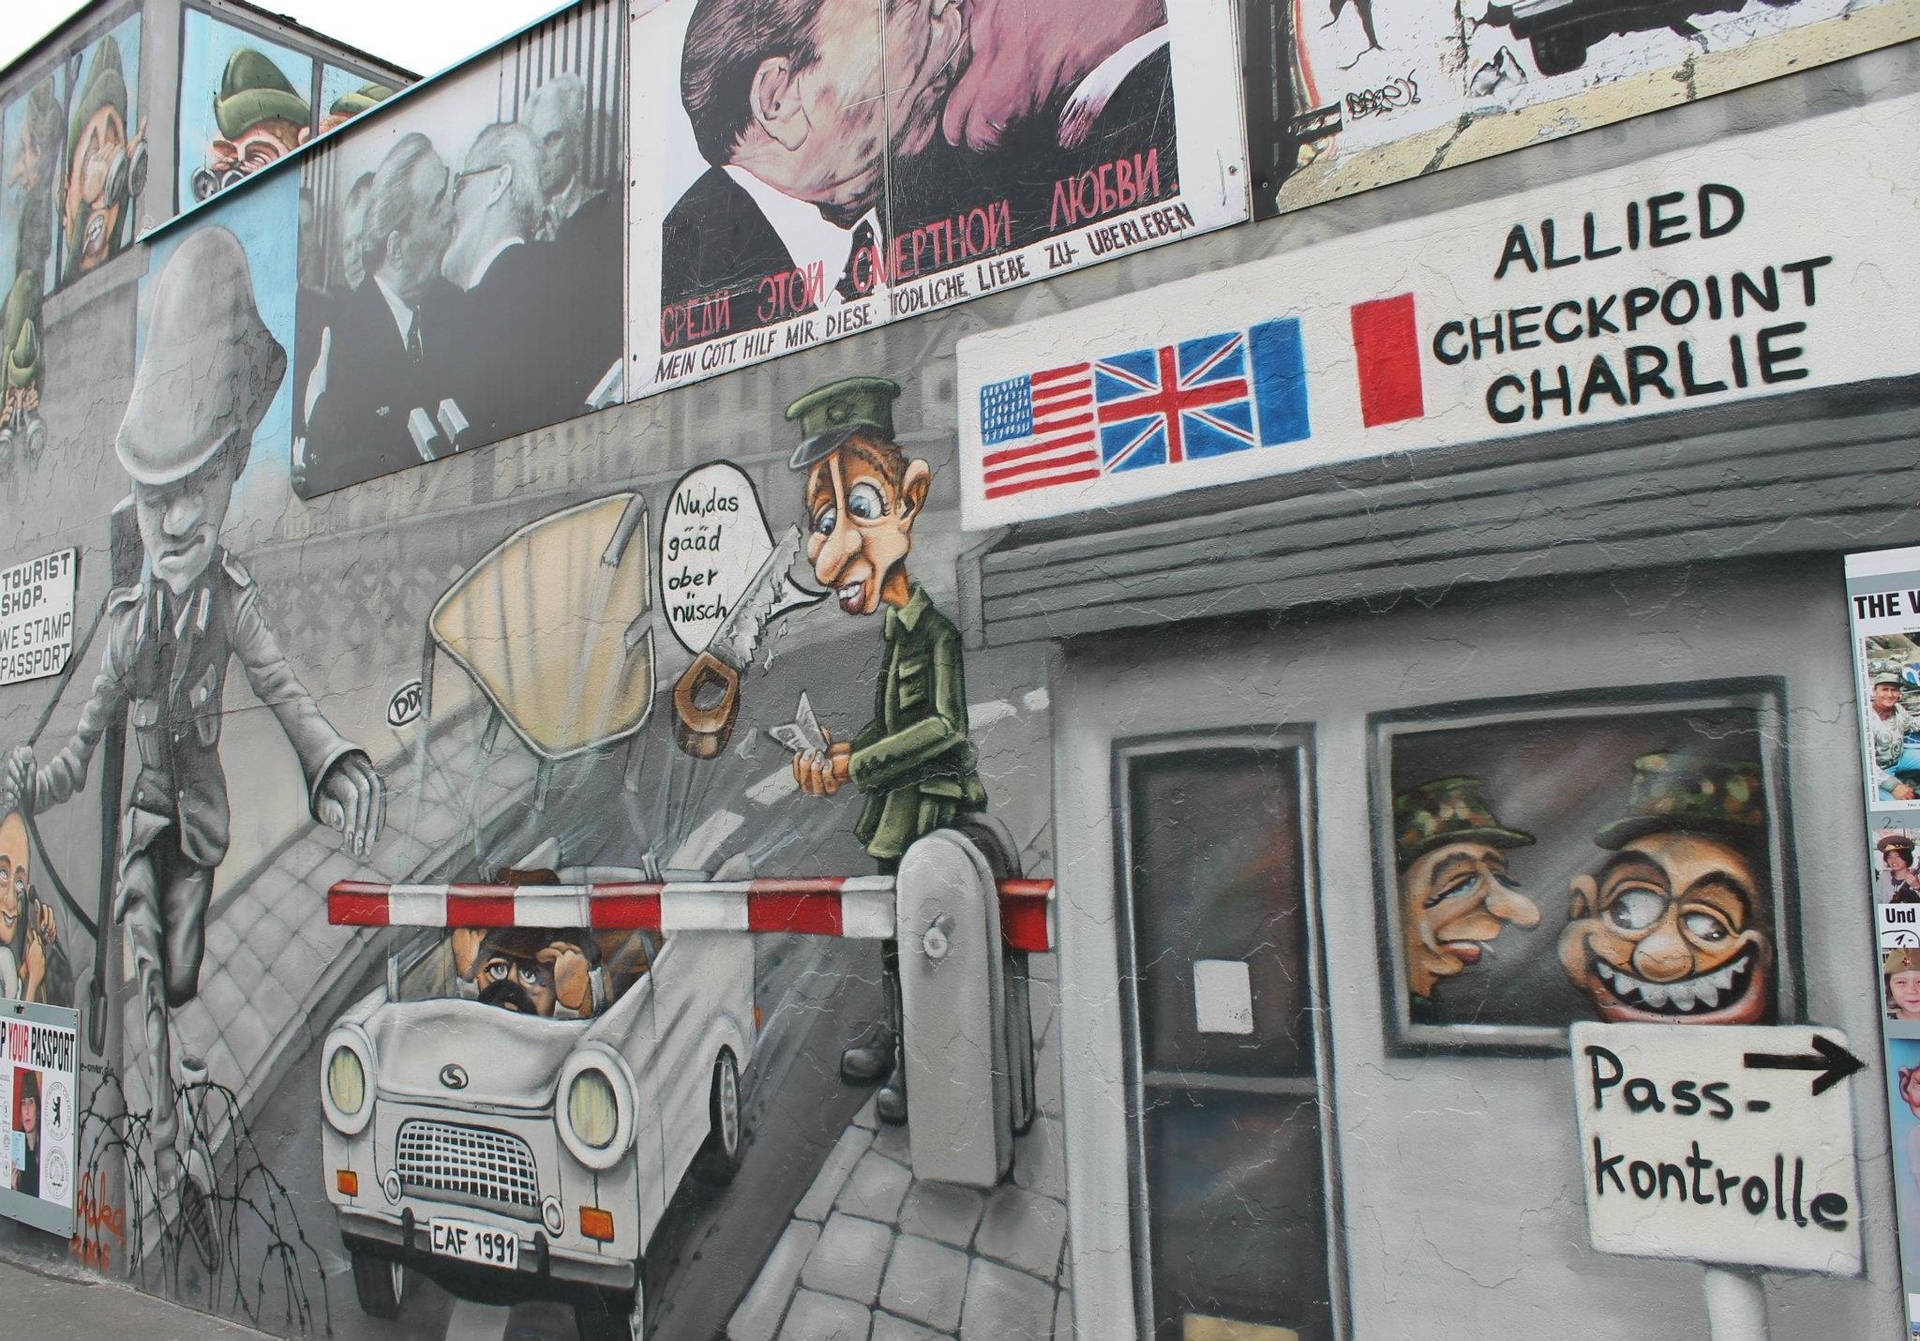 Berlin Wall Charlie Checkpoint Vandals Background